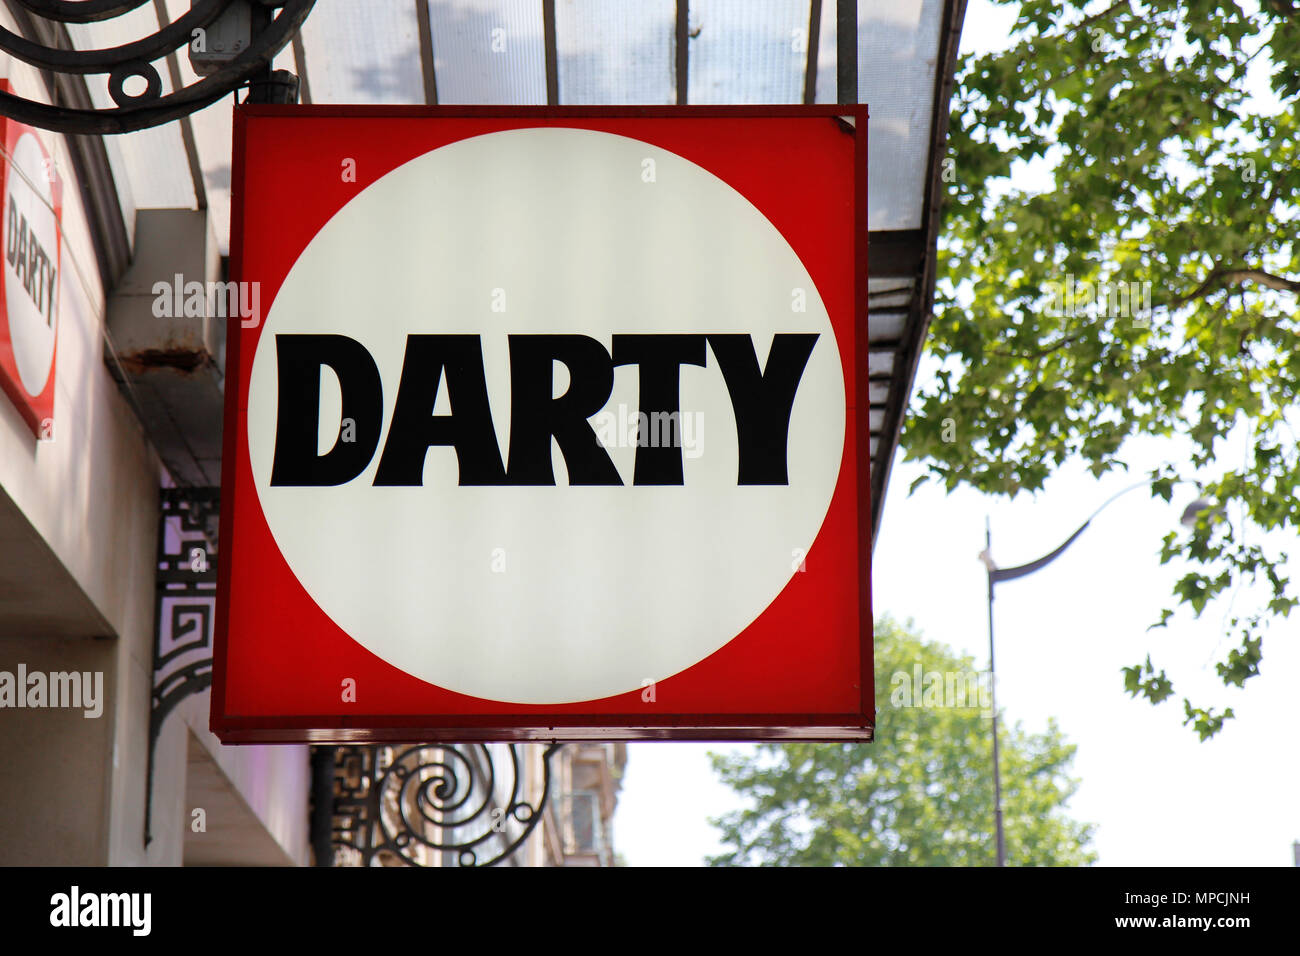 Darty, french electronic goods retailer, sign, in Paris, France Stock Photo